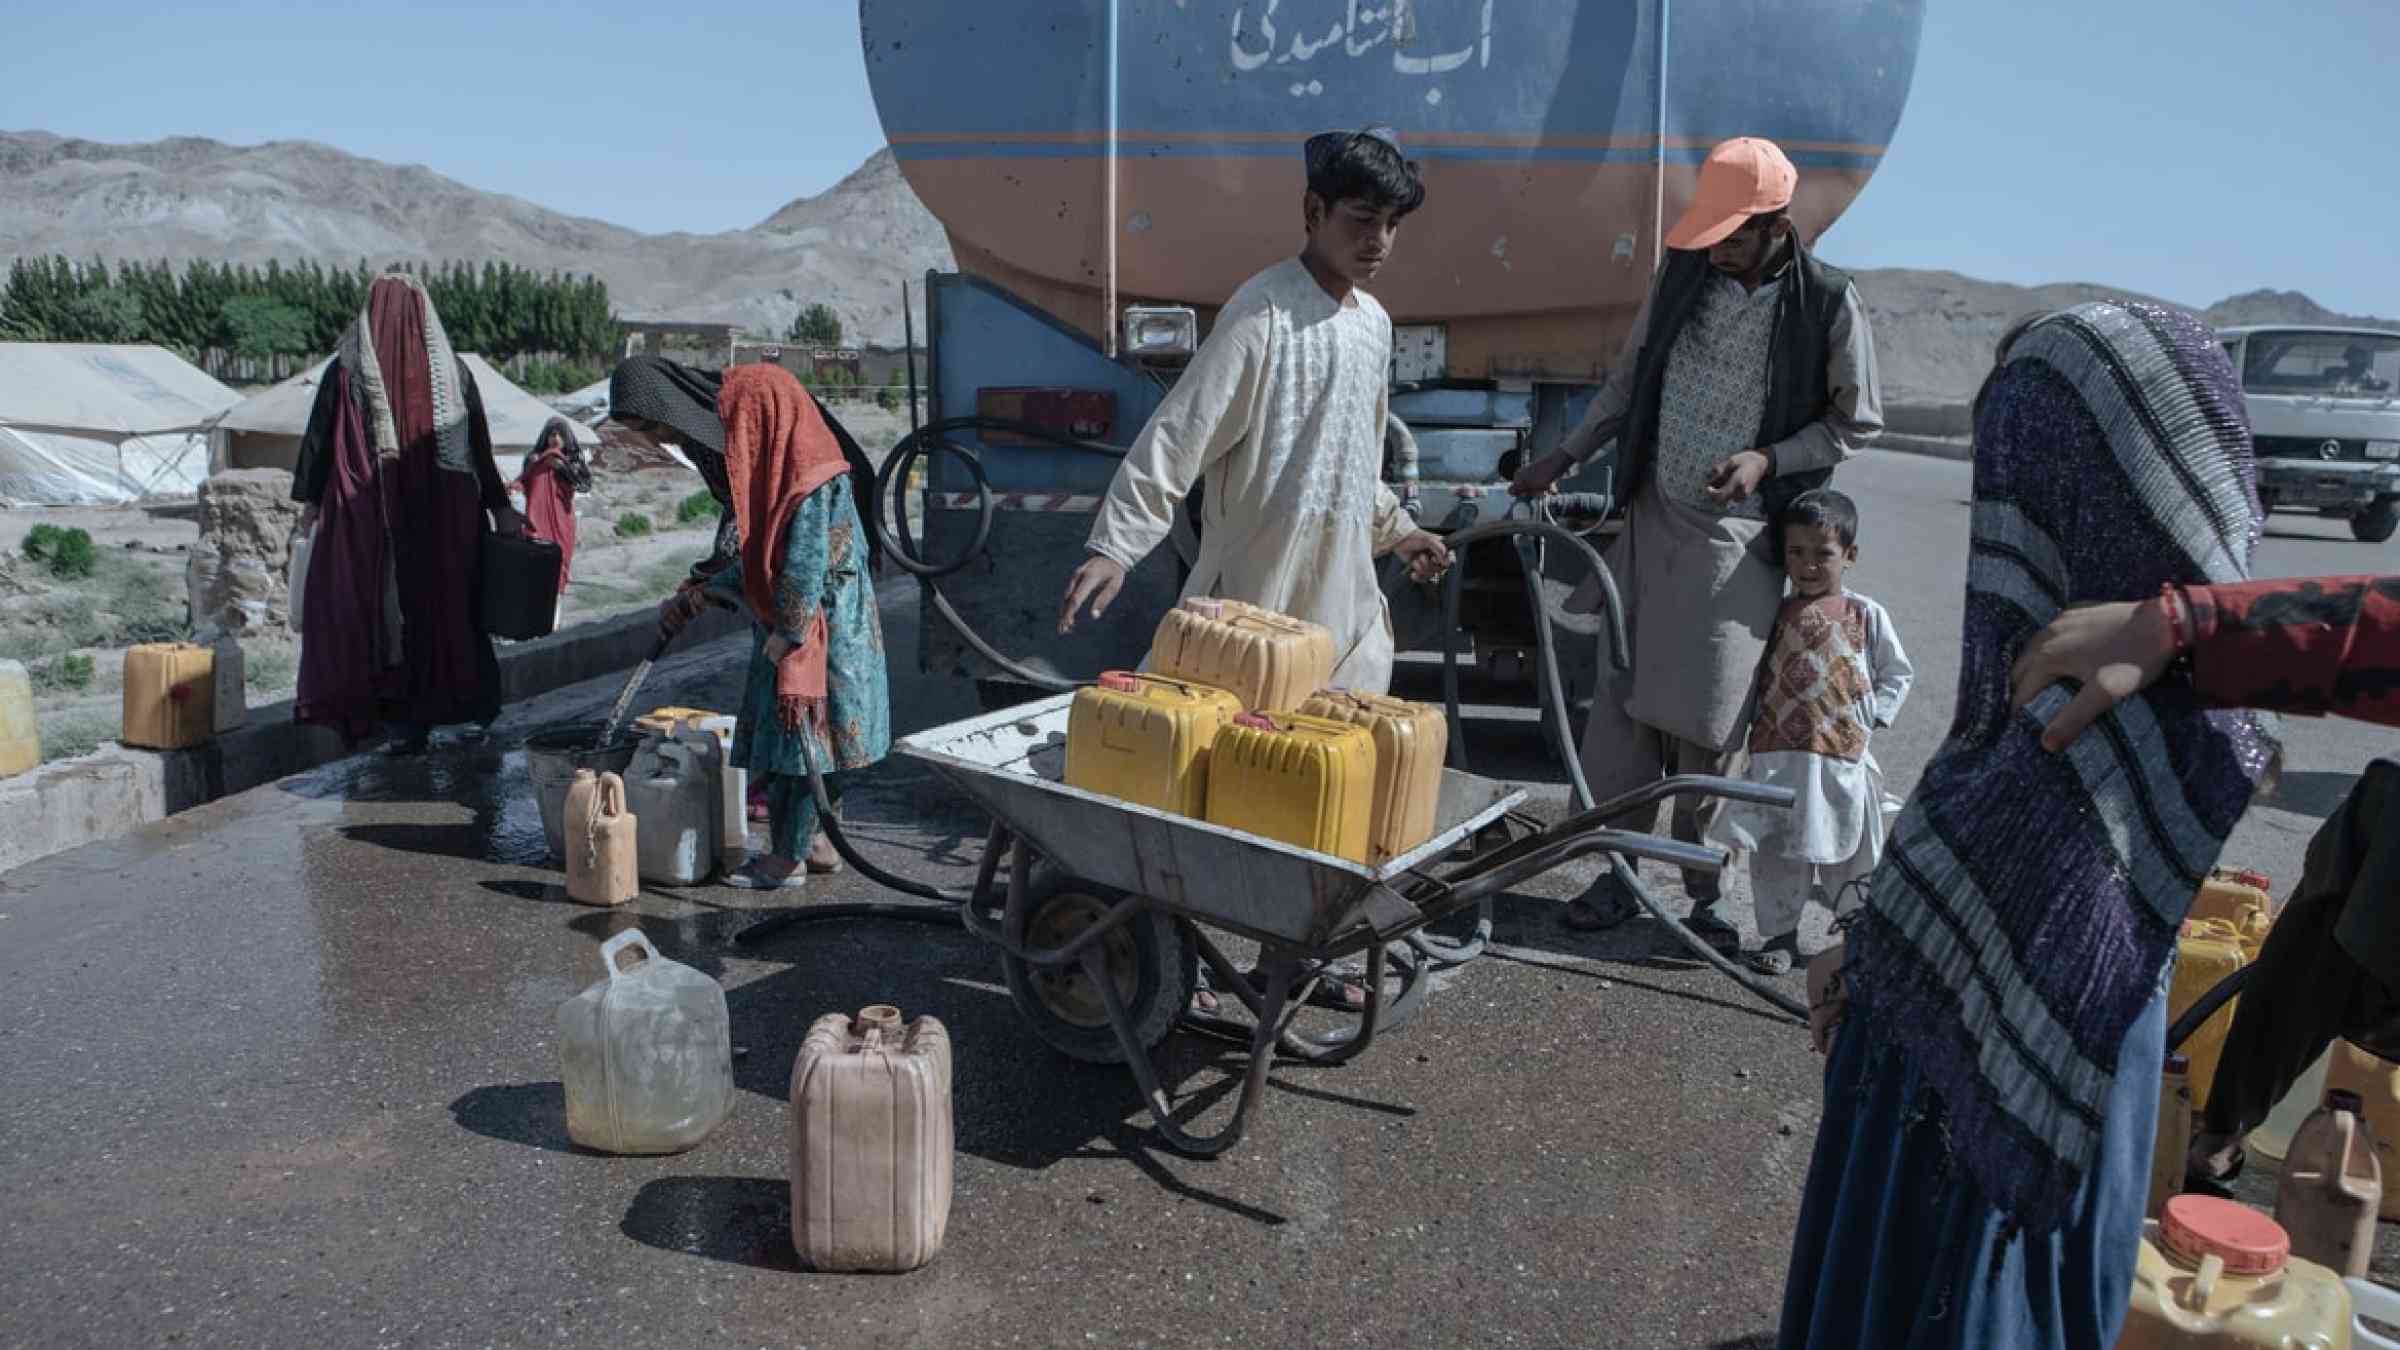 The drought-displaced Afghan children fill water containers to carry to their tents from a tanker at a camp for internally displaced people on the outskirts of Herat province (2019).